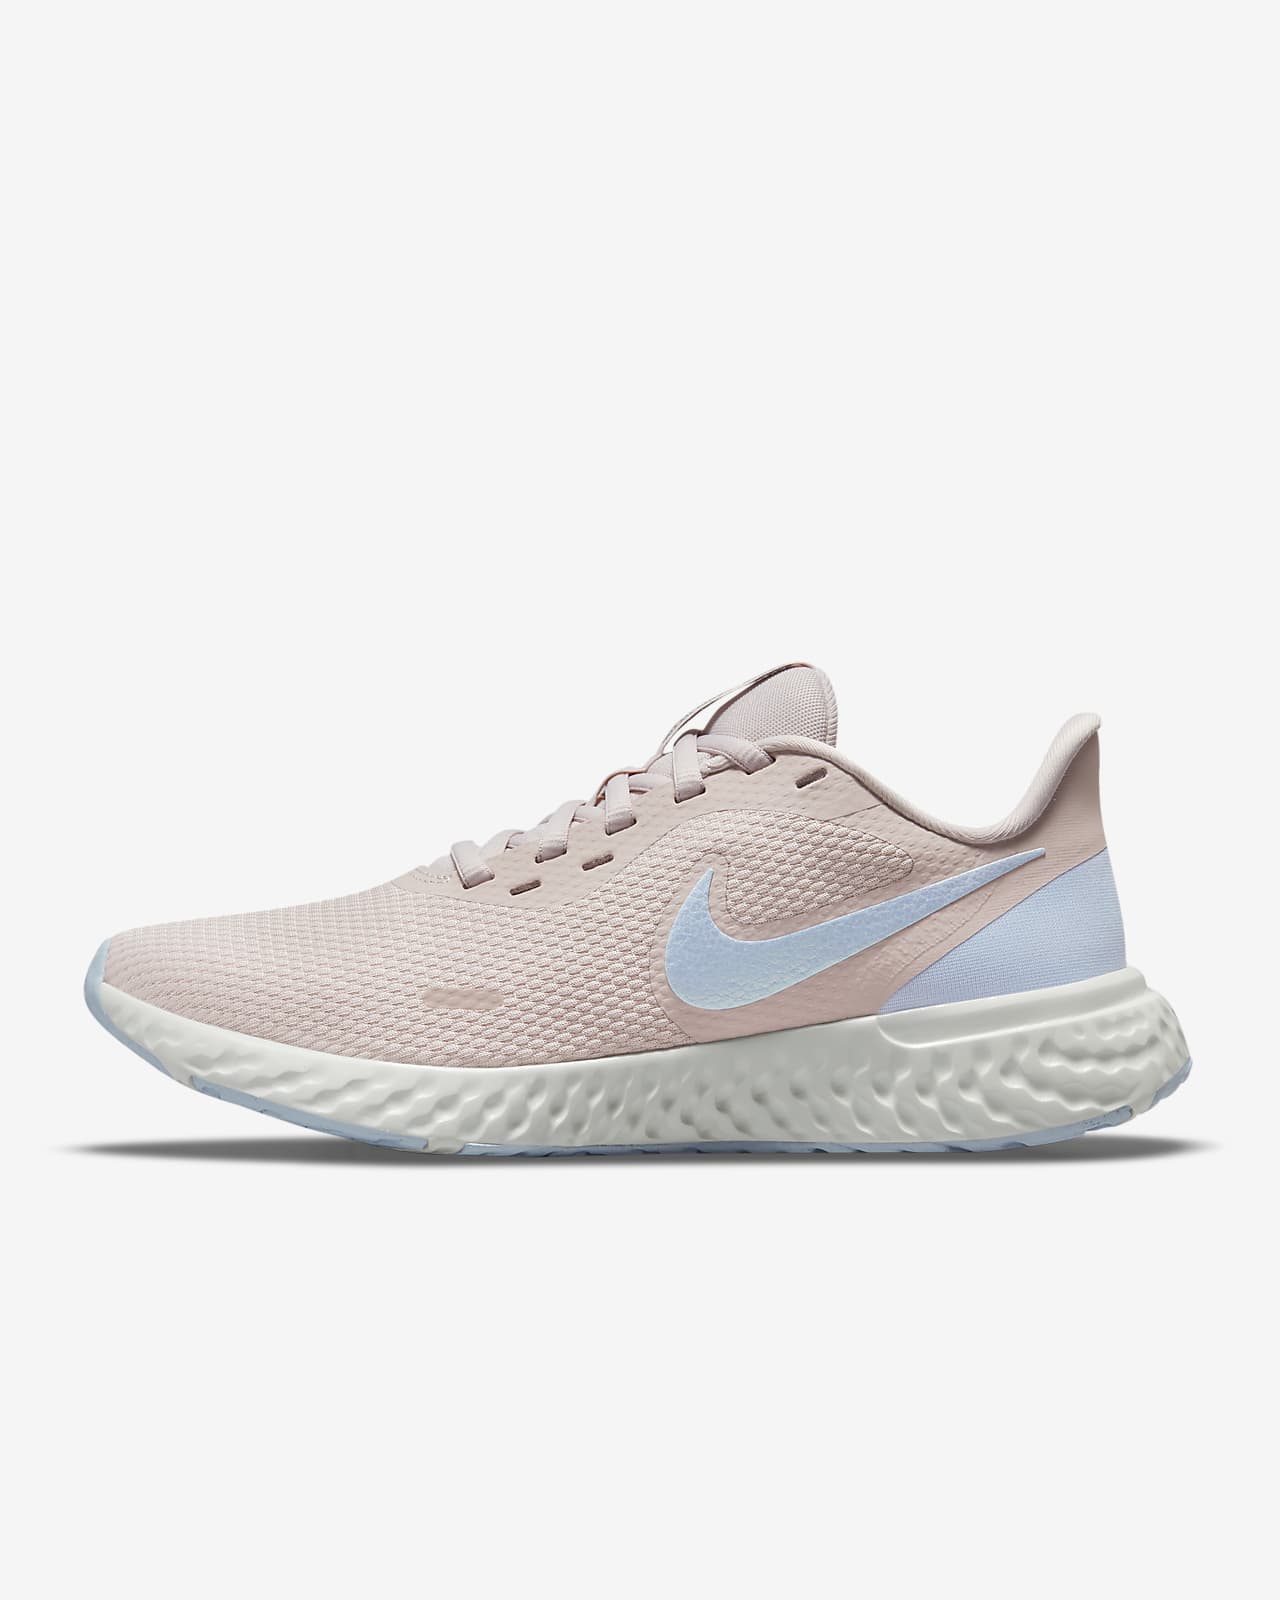 magia Requisitos Definitivo Nike Revolution 5 Women's Road Running Shoes. Nike ID